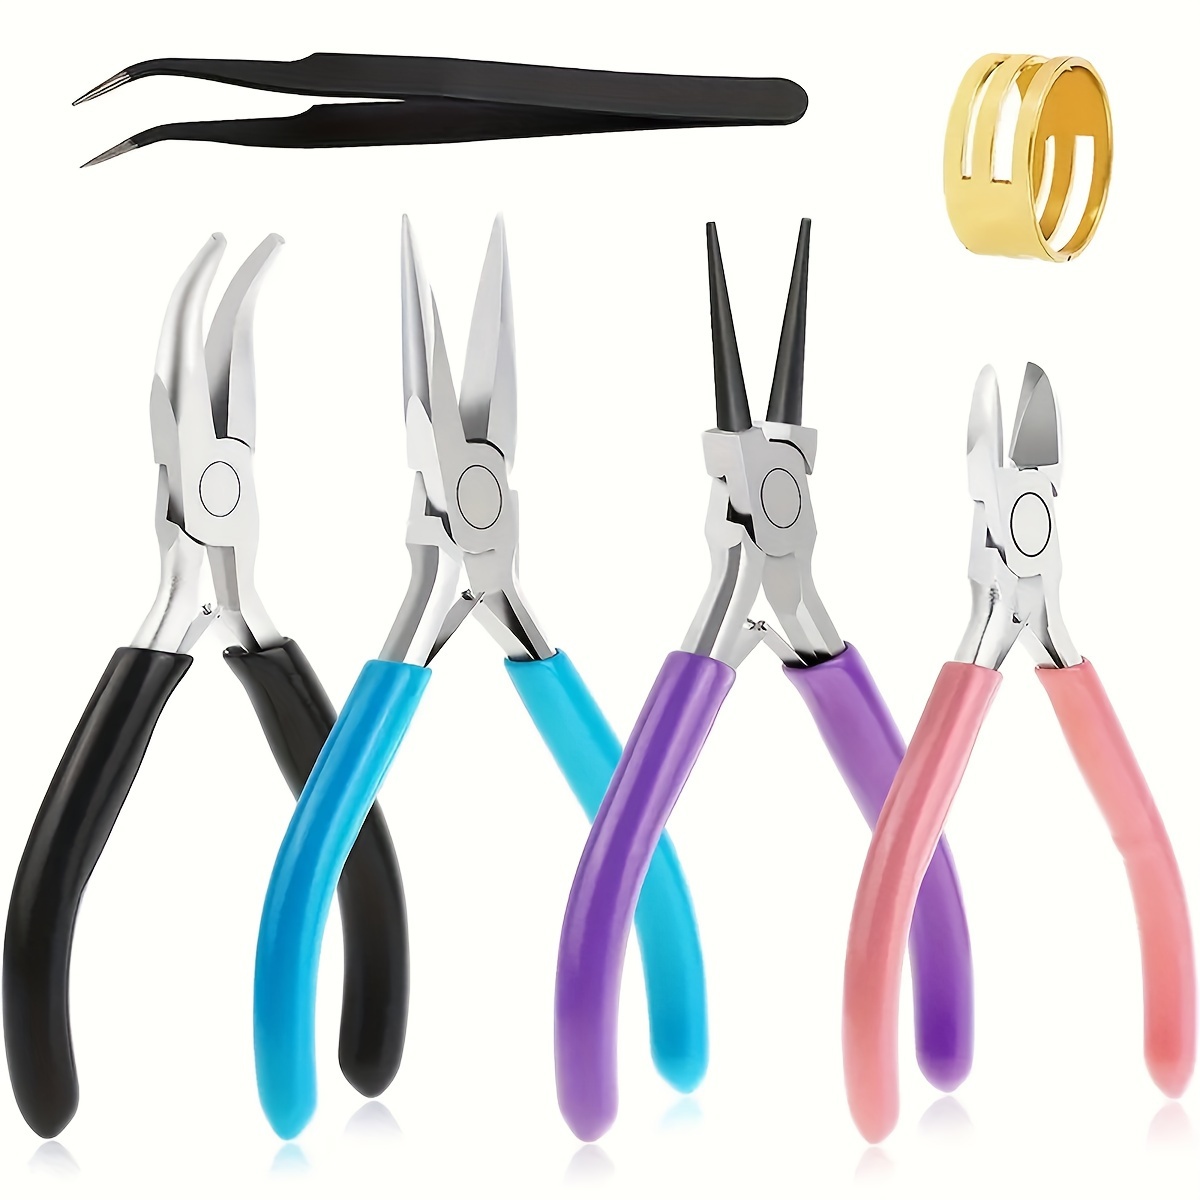 Jewelry Pliers Set, Paxcoo 3Pcs Jewelry Making Tools Kit includes